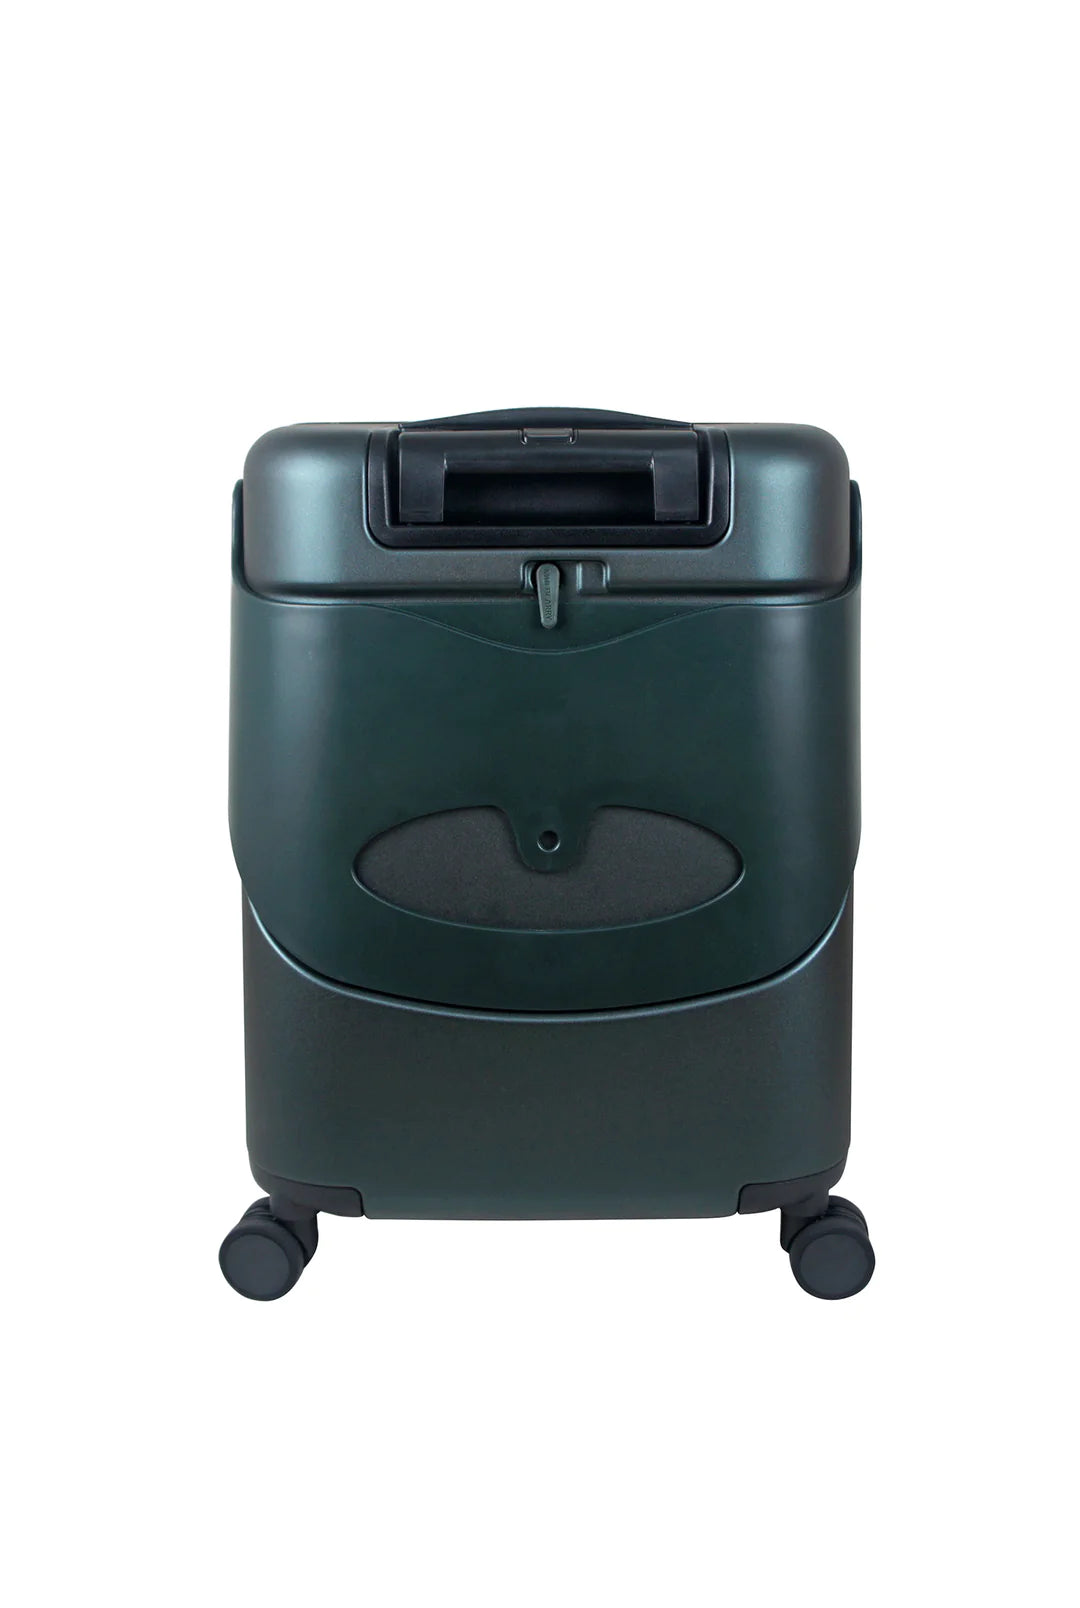 miamily 24 inch luggage forest green